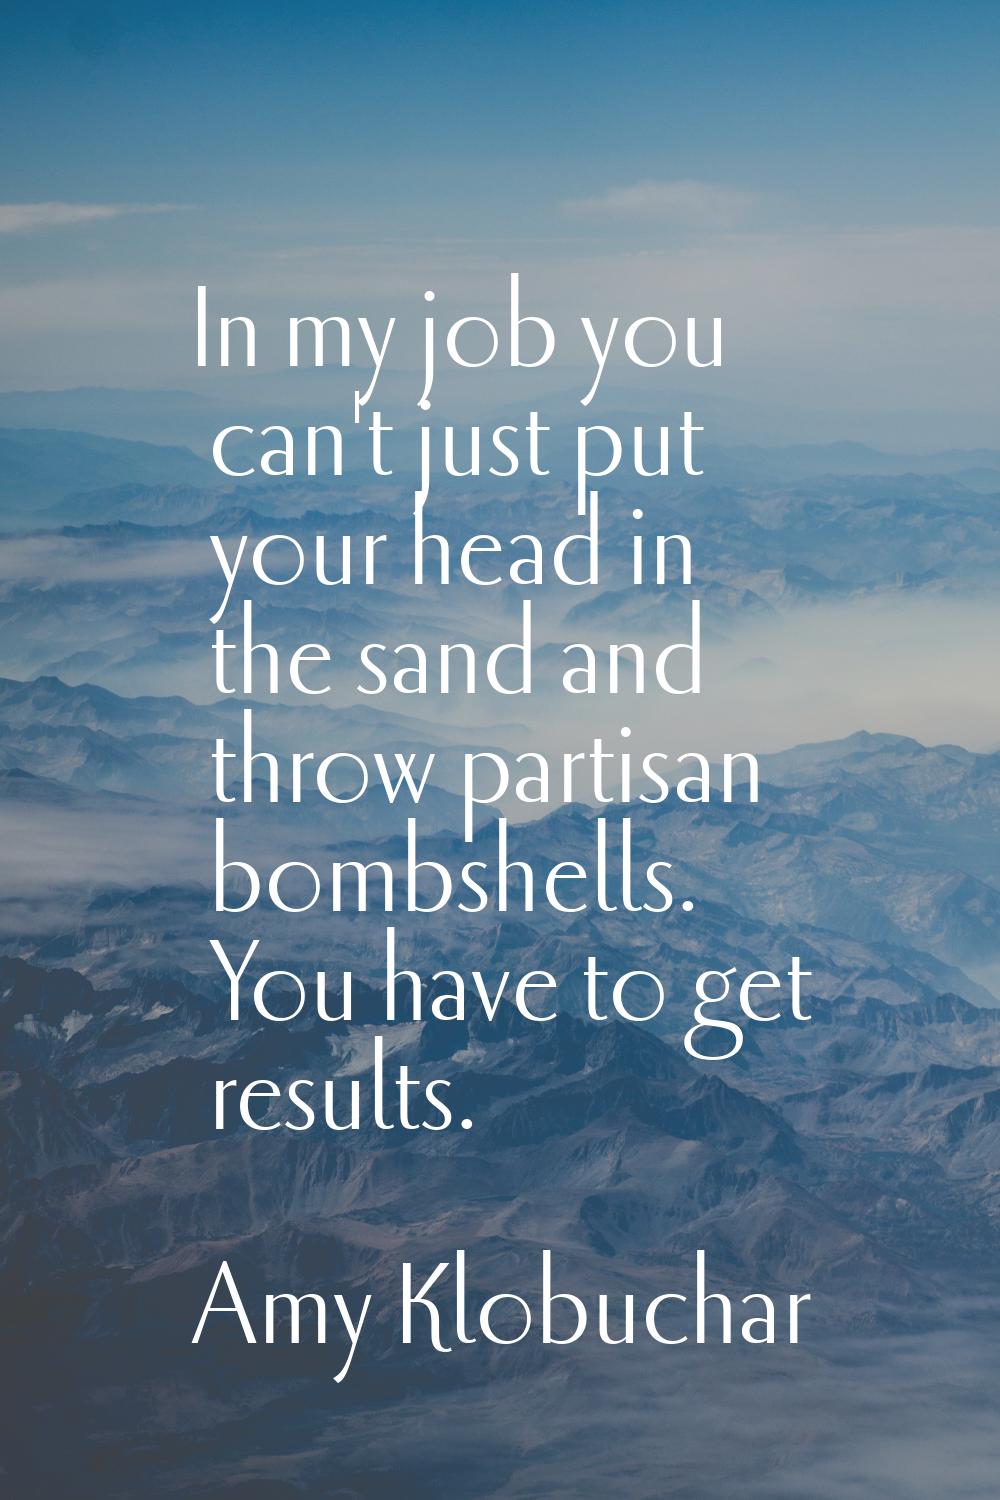 In my job you can't just put your head in the sand and throw partisan bombshells. You have to get r